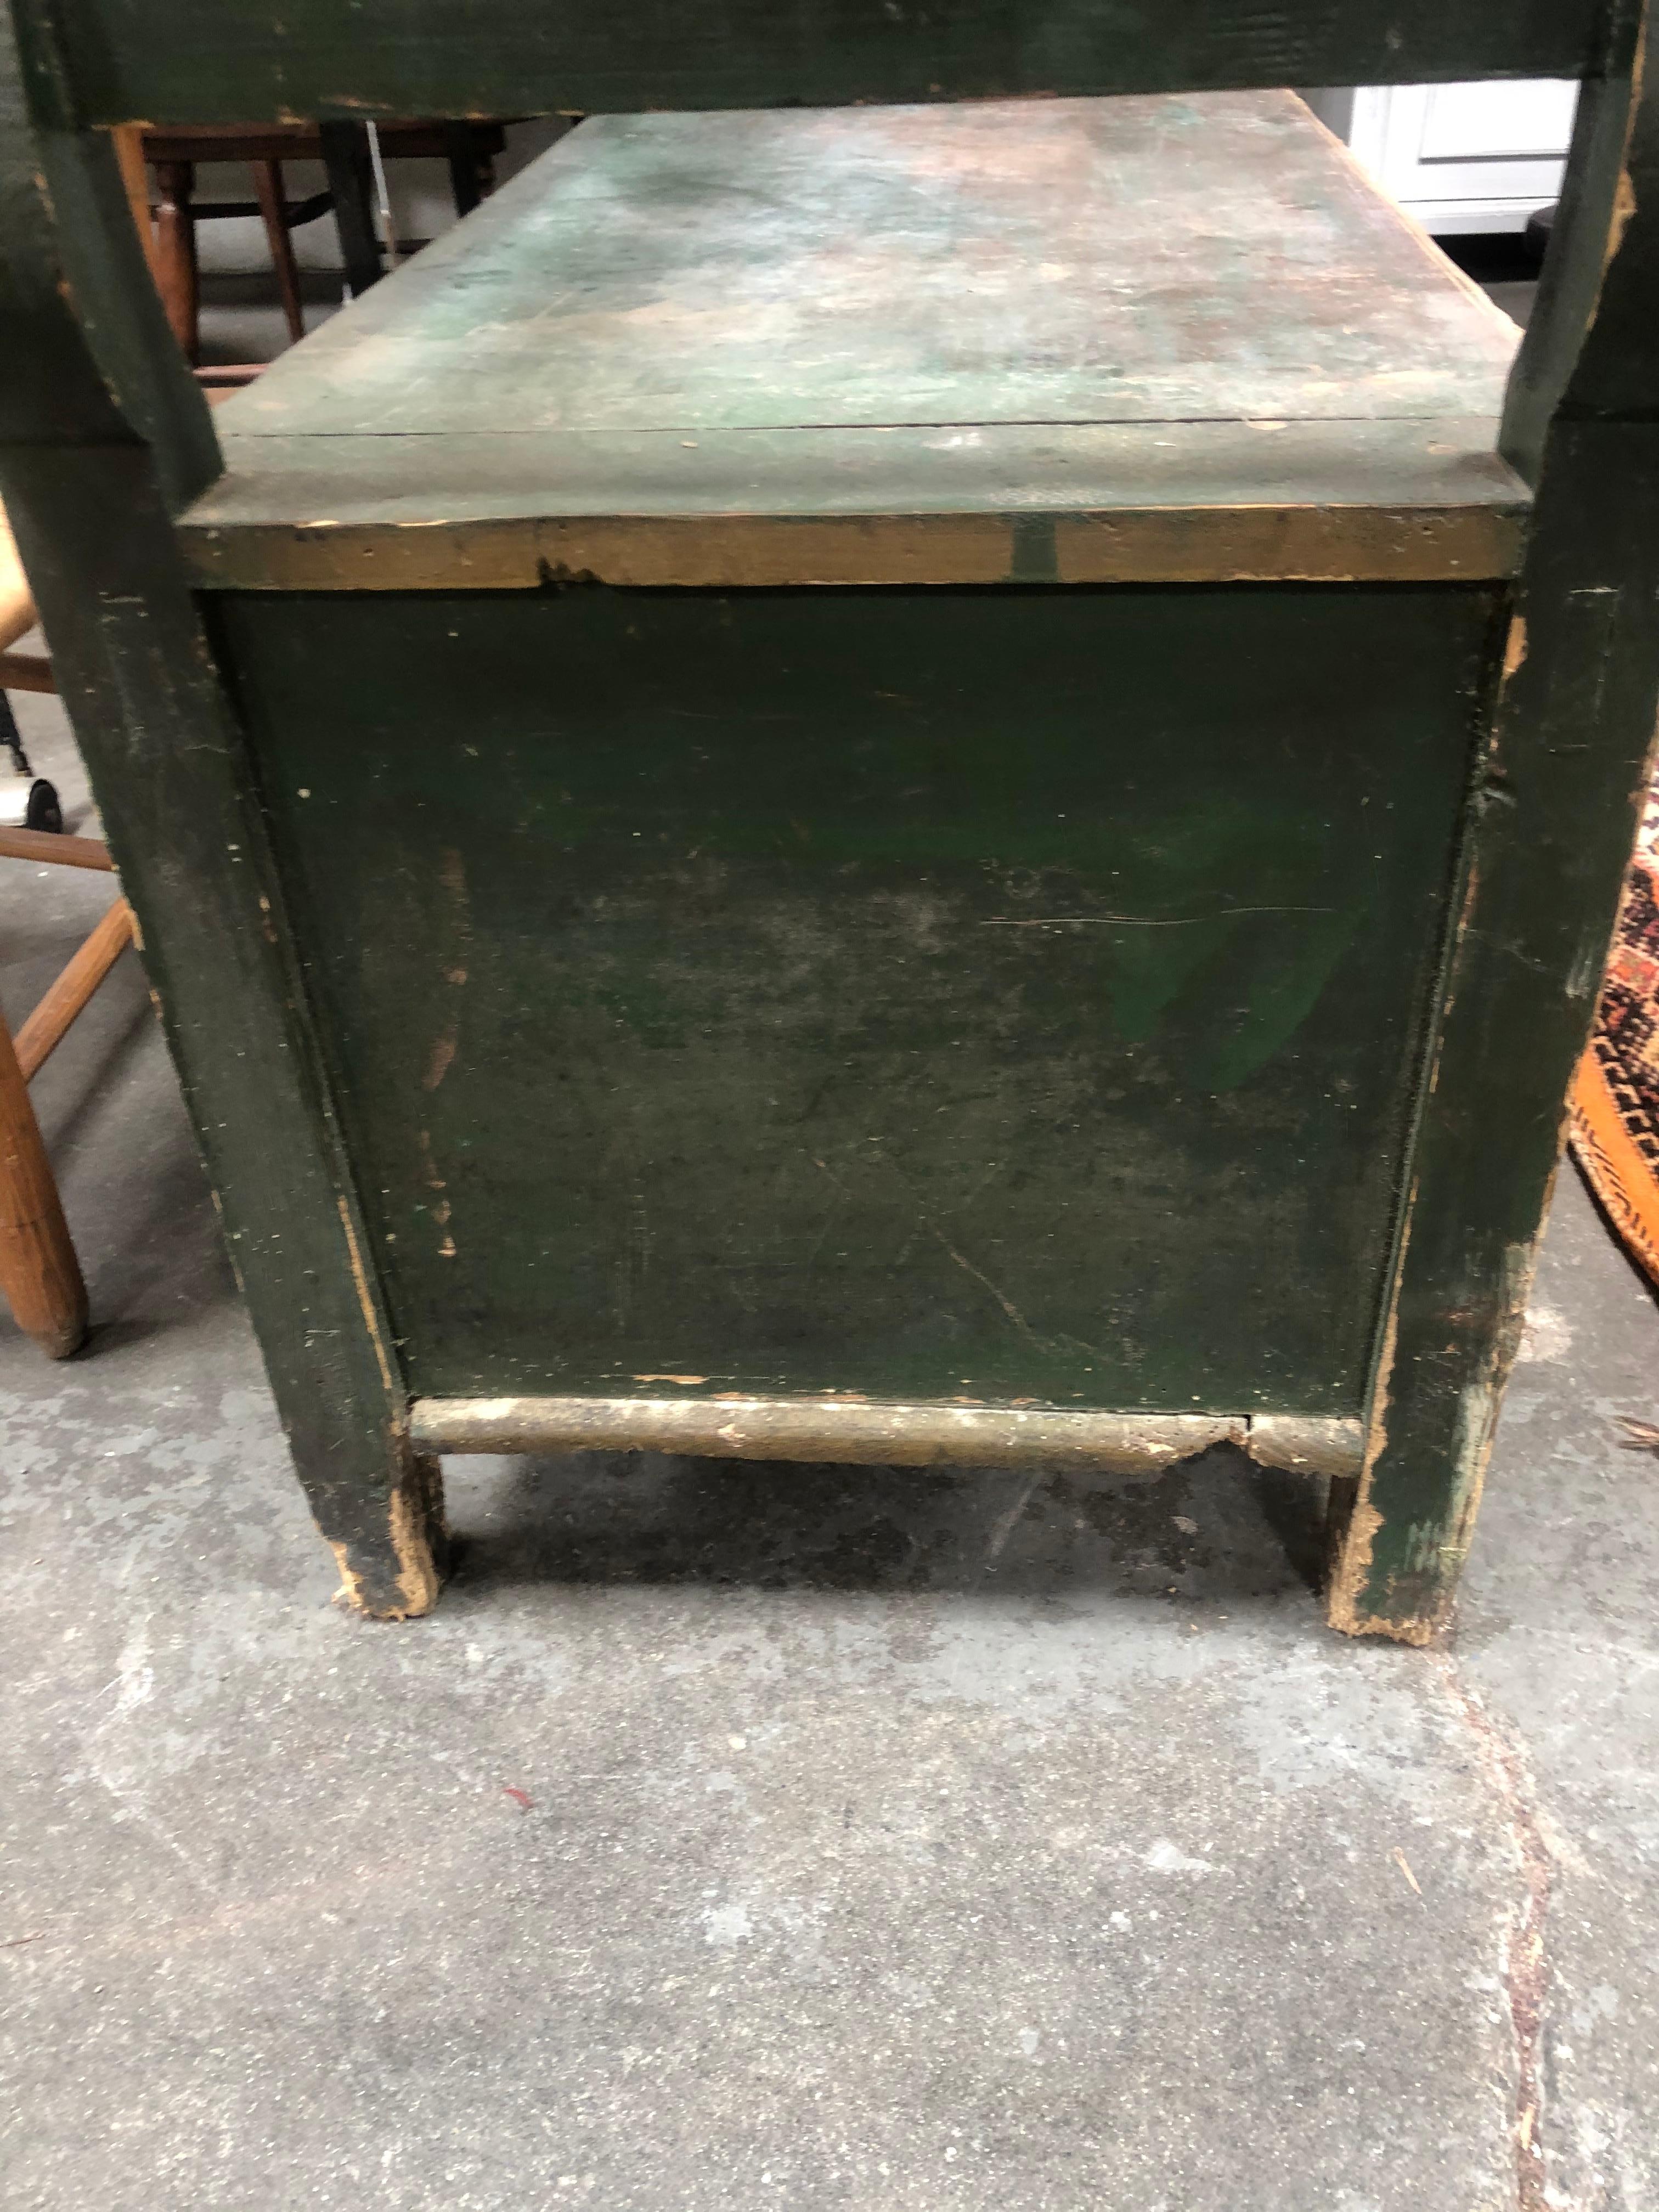 Antique storage bench is a European piece from the early 1900s. Painted forest green. Given that this piece is quite large, it would work well in any entryway, foyer, living room, or covered outdoor space. 

Measure: Seat height 19.5